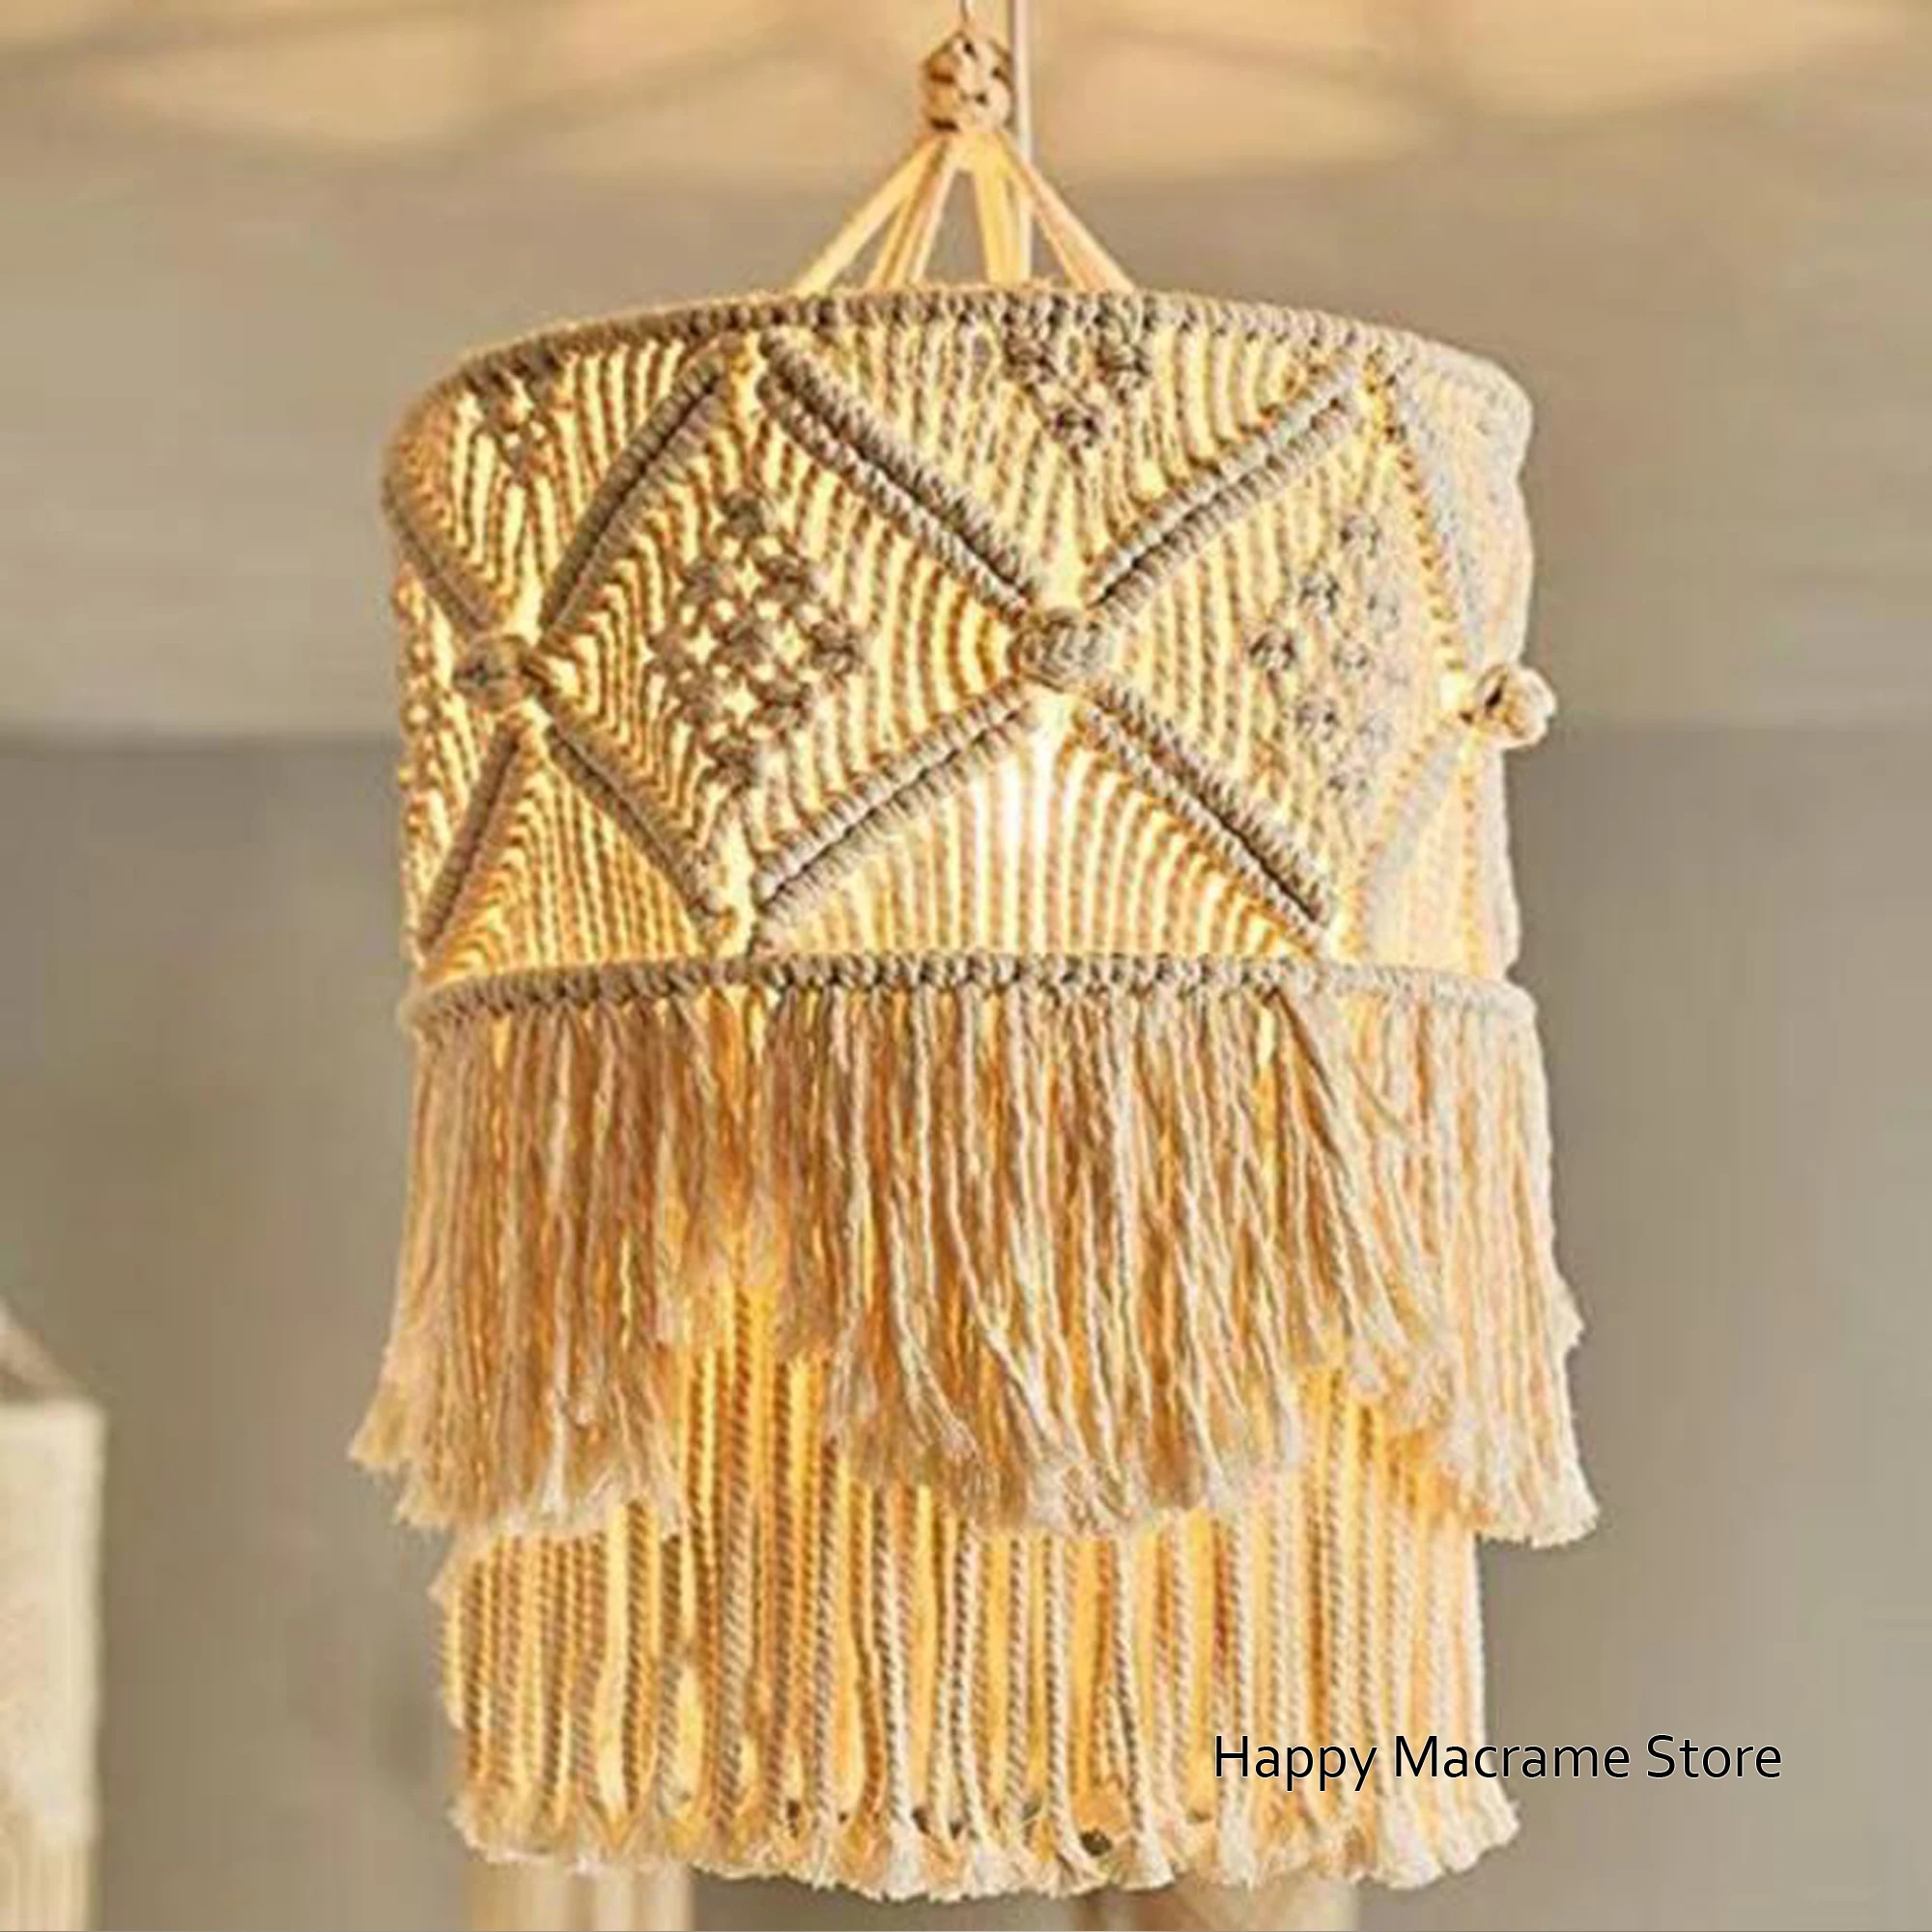 

Decorative Handmade Macrame Lamps Chandeliers Bohemian Lamps Lampshade Boho Mobile Nursery Mobile Home Decor - Without lamp